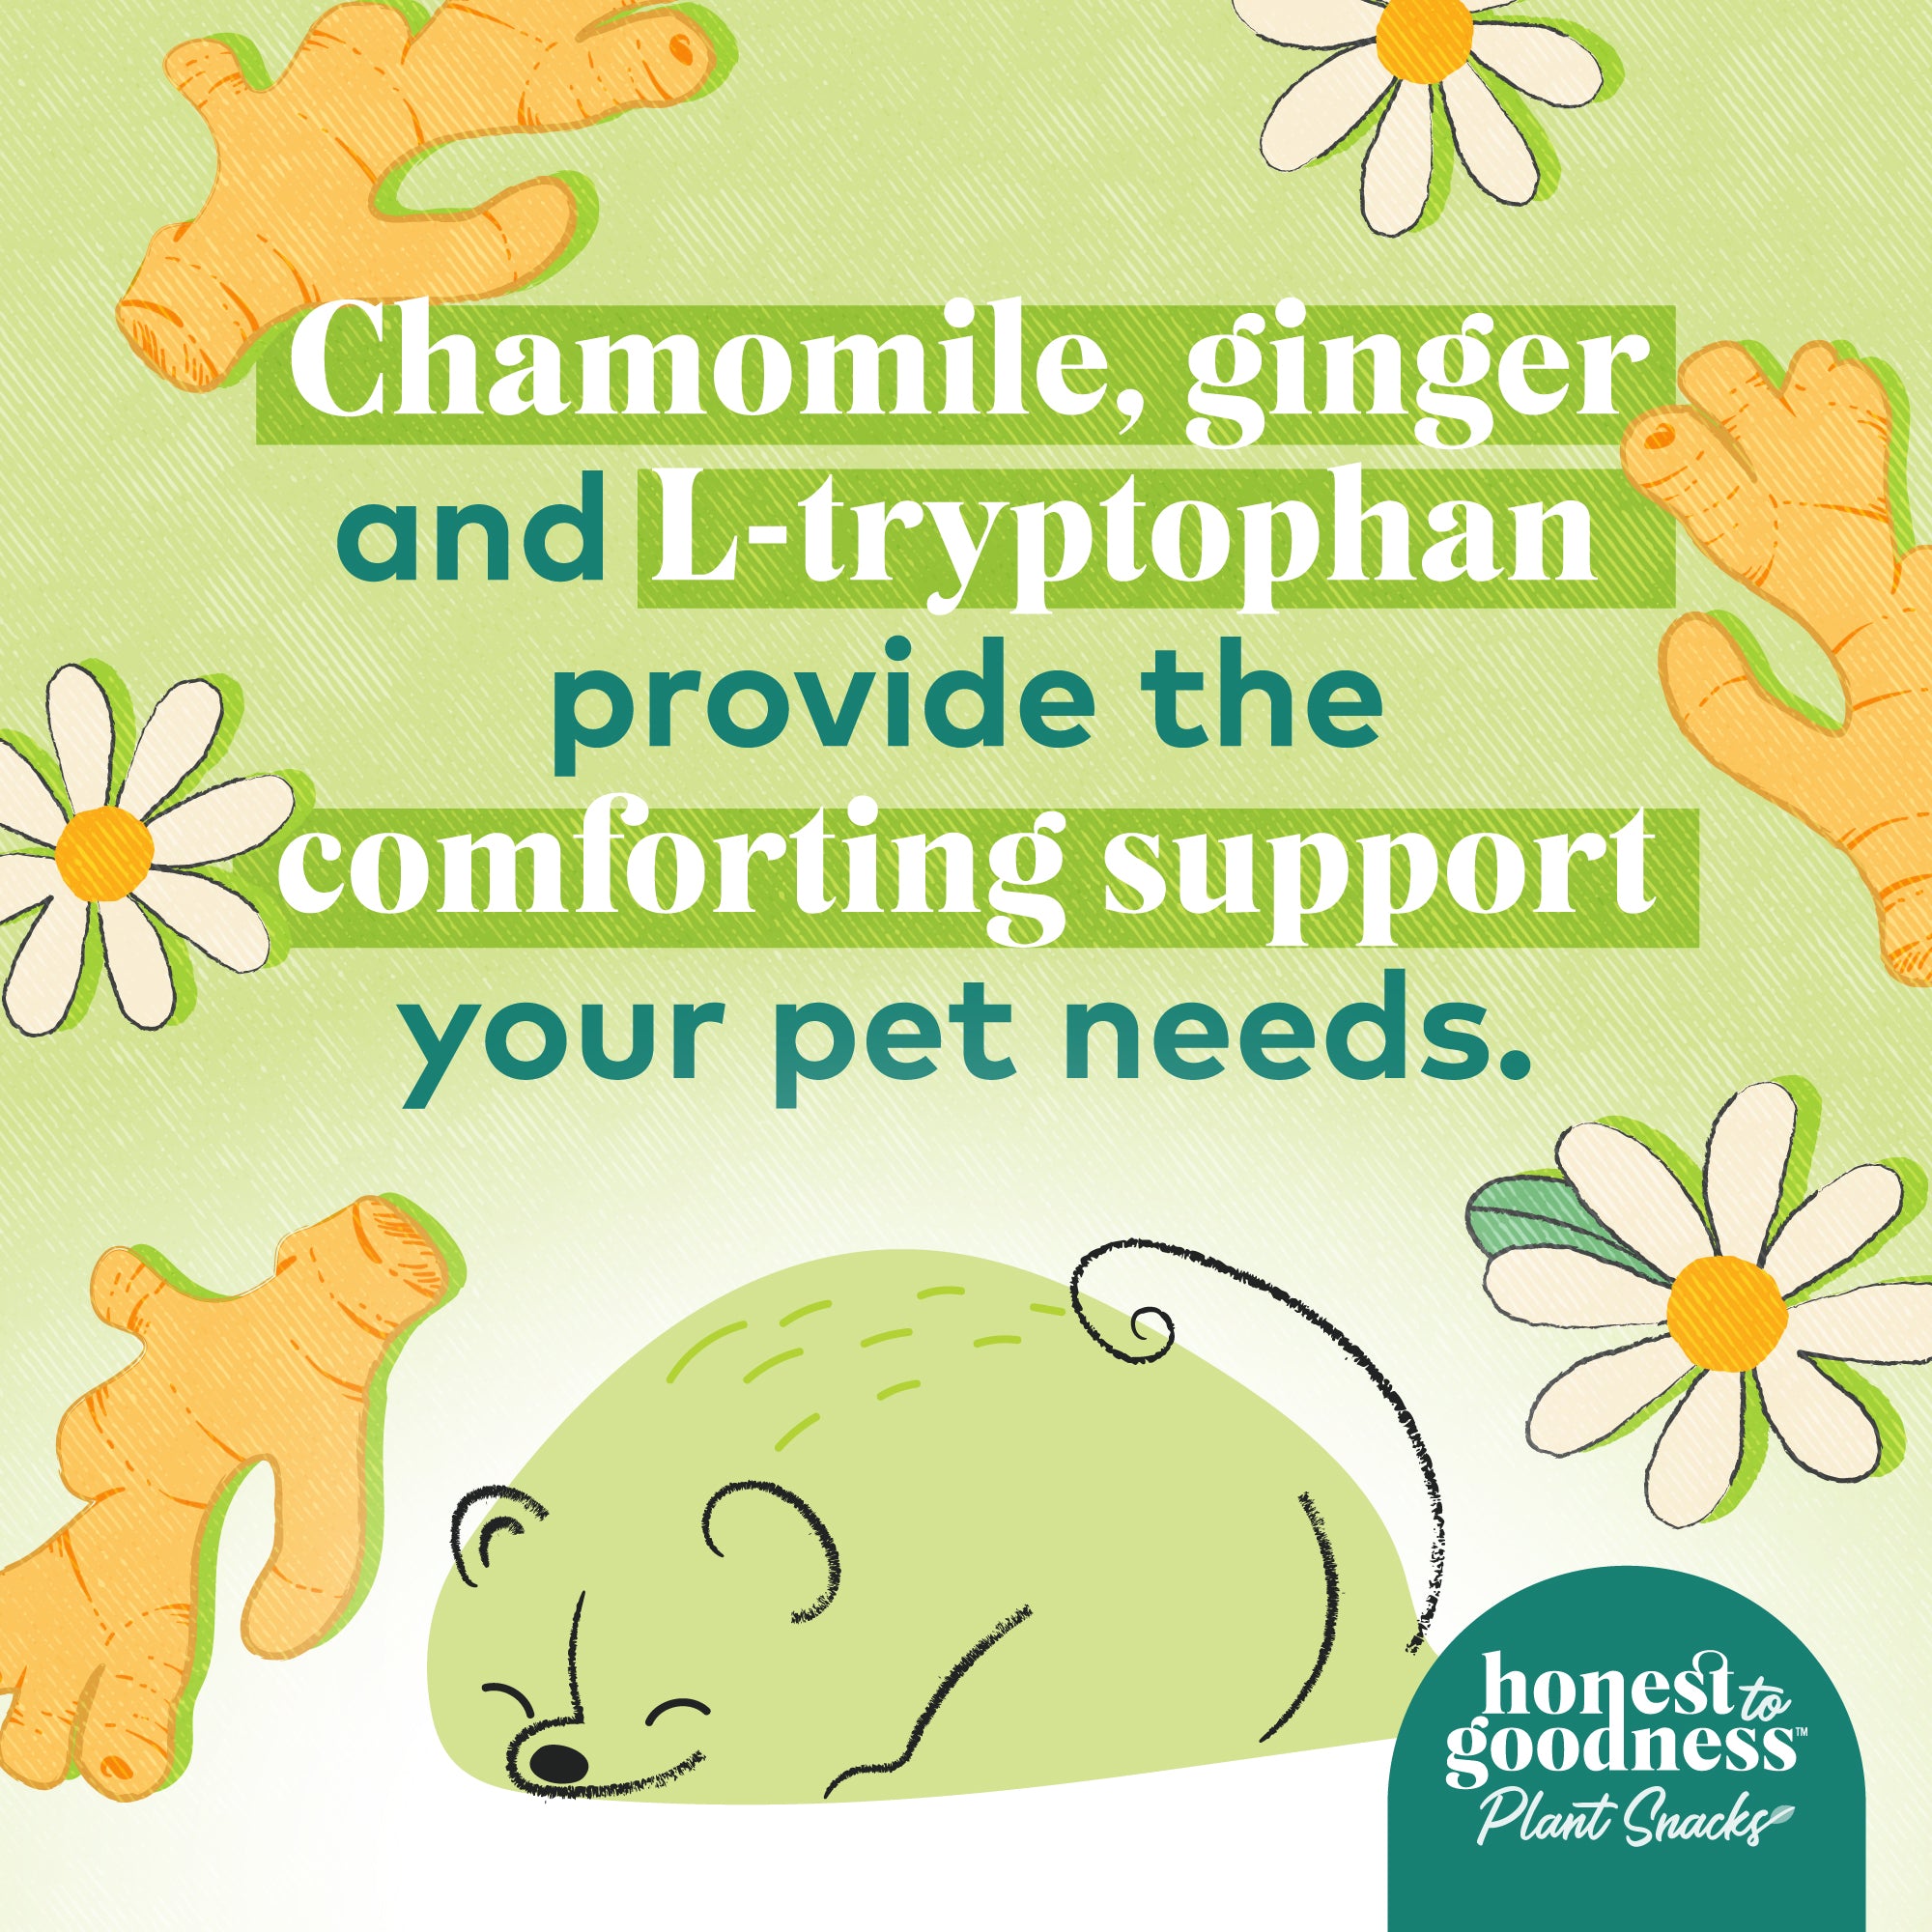 Chamomile, ginger and L-tryptophan provide the comforting support your pet needs.